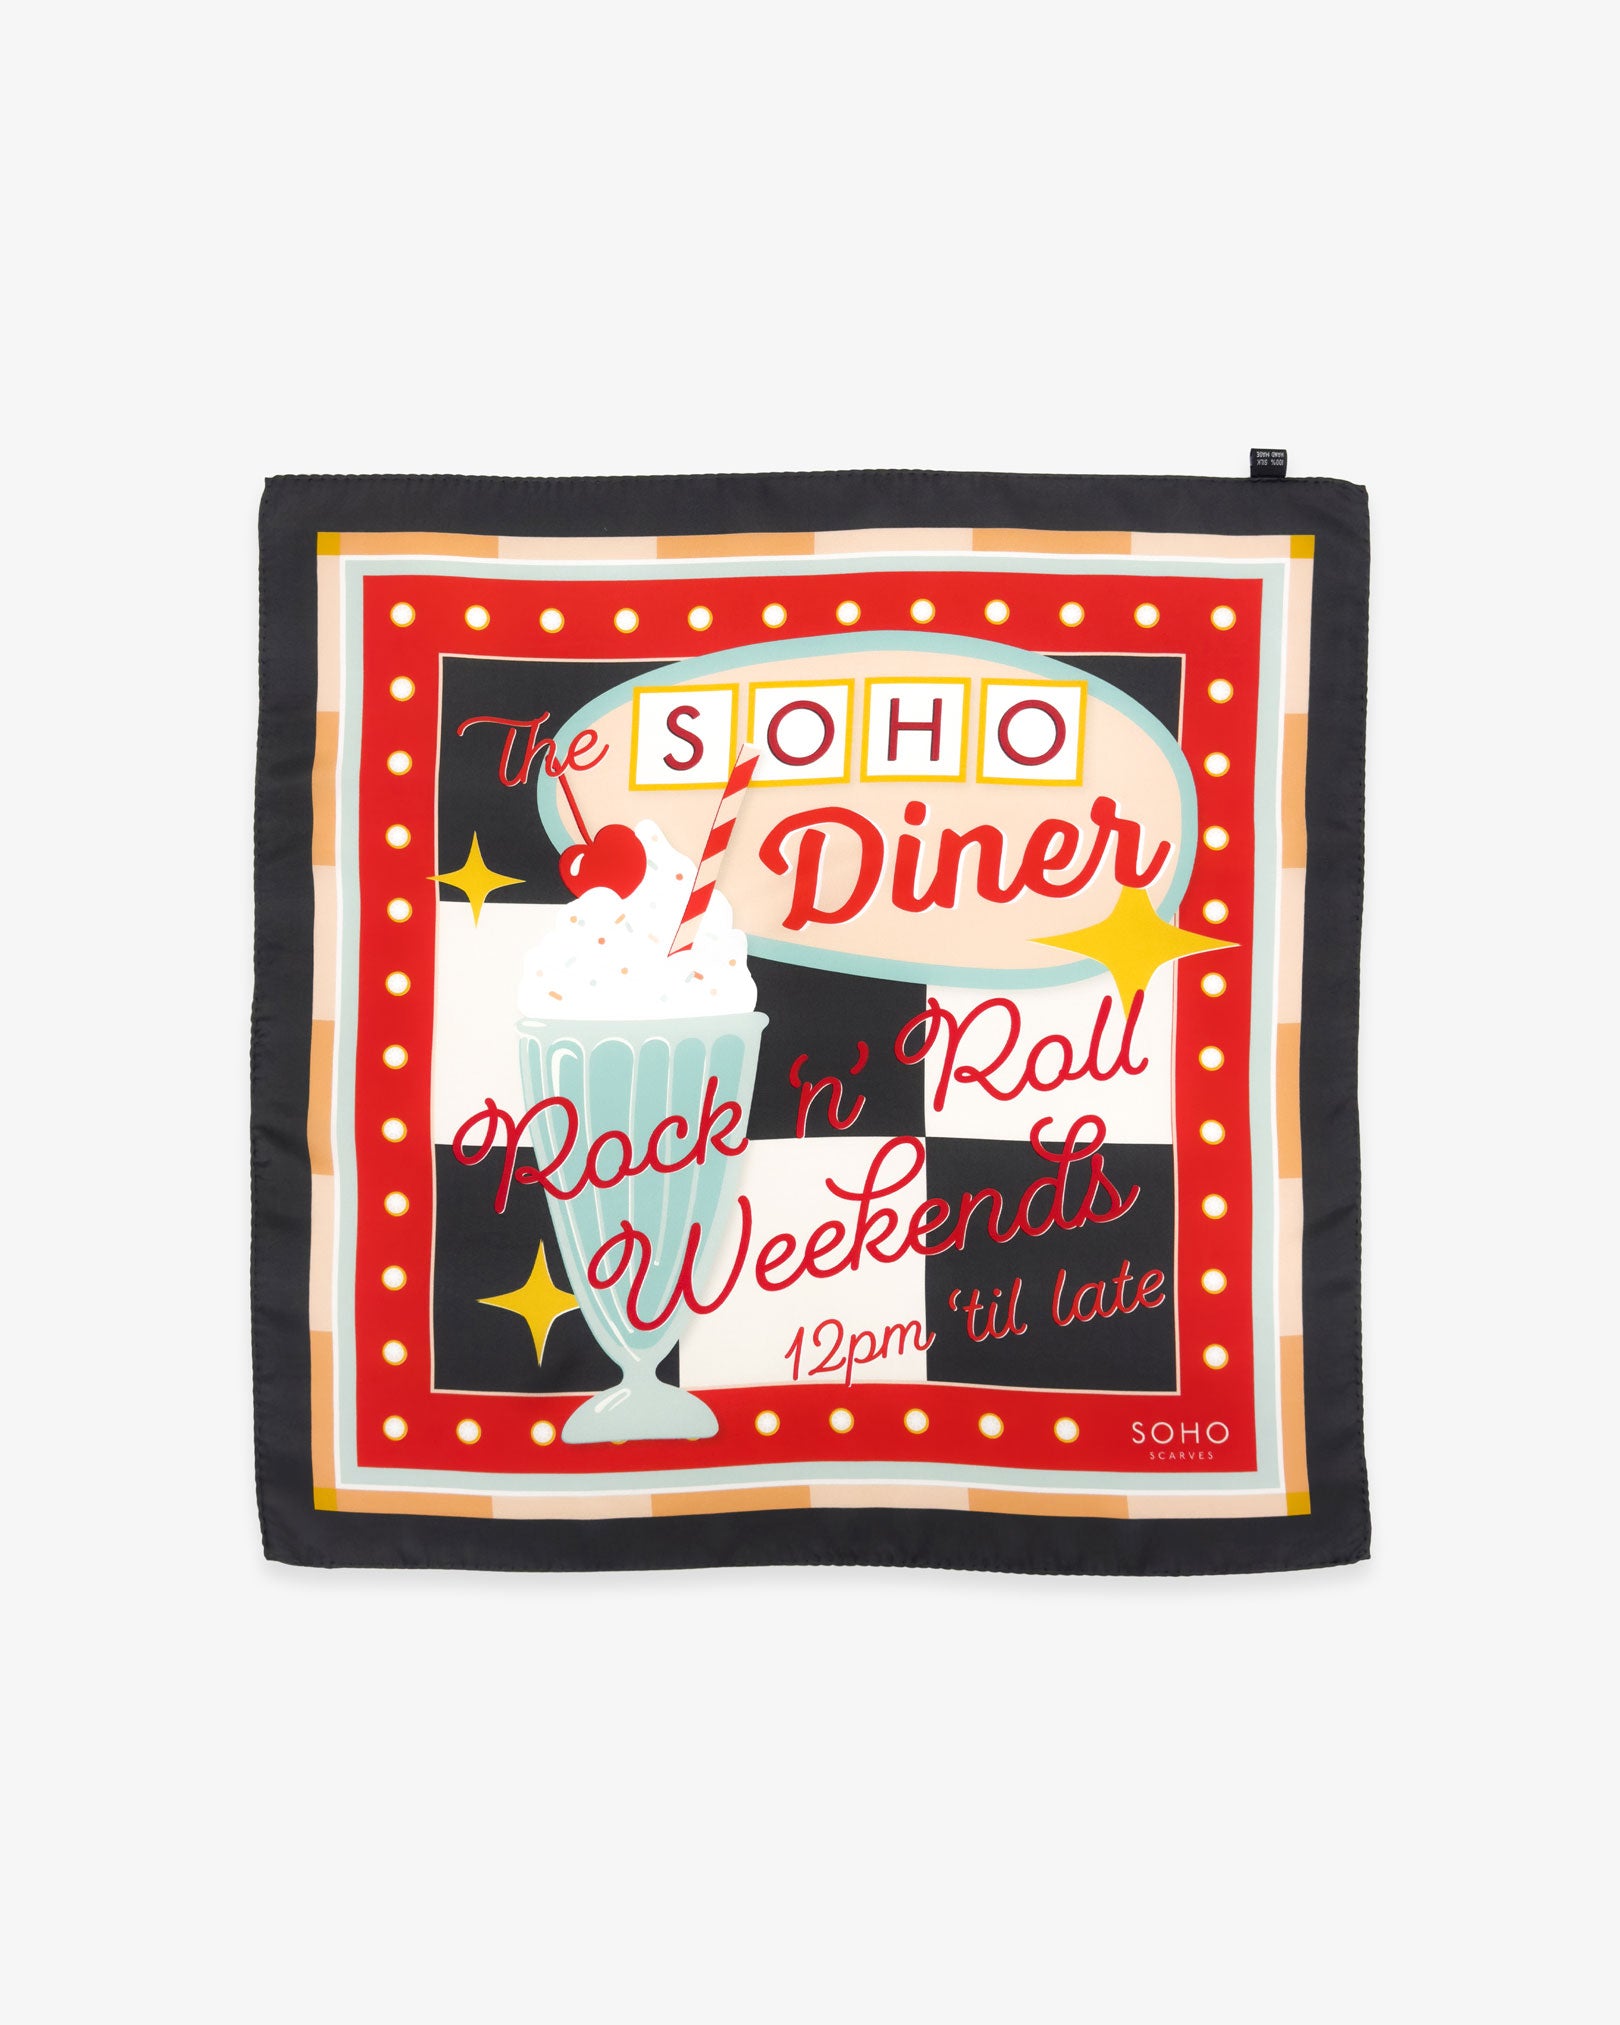 Fully unfolded 'Milkshake' on charcoal silk neckerchief, showing the full retro 'SOHO Diner' signage design using a classic 1950's pastel colour palette.